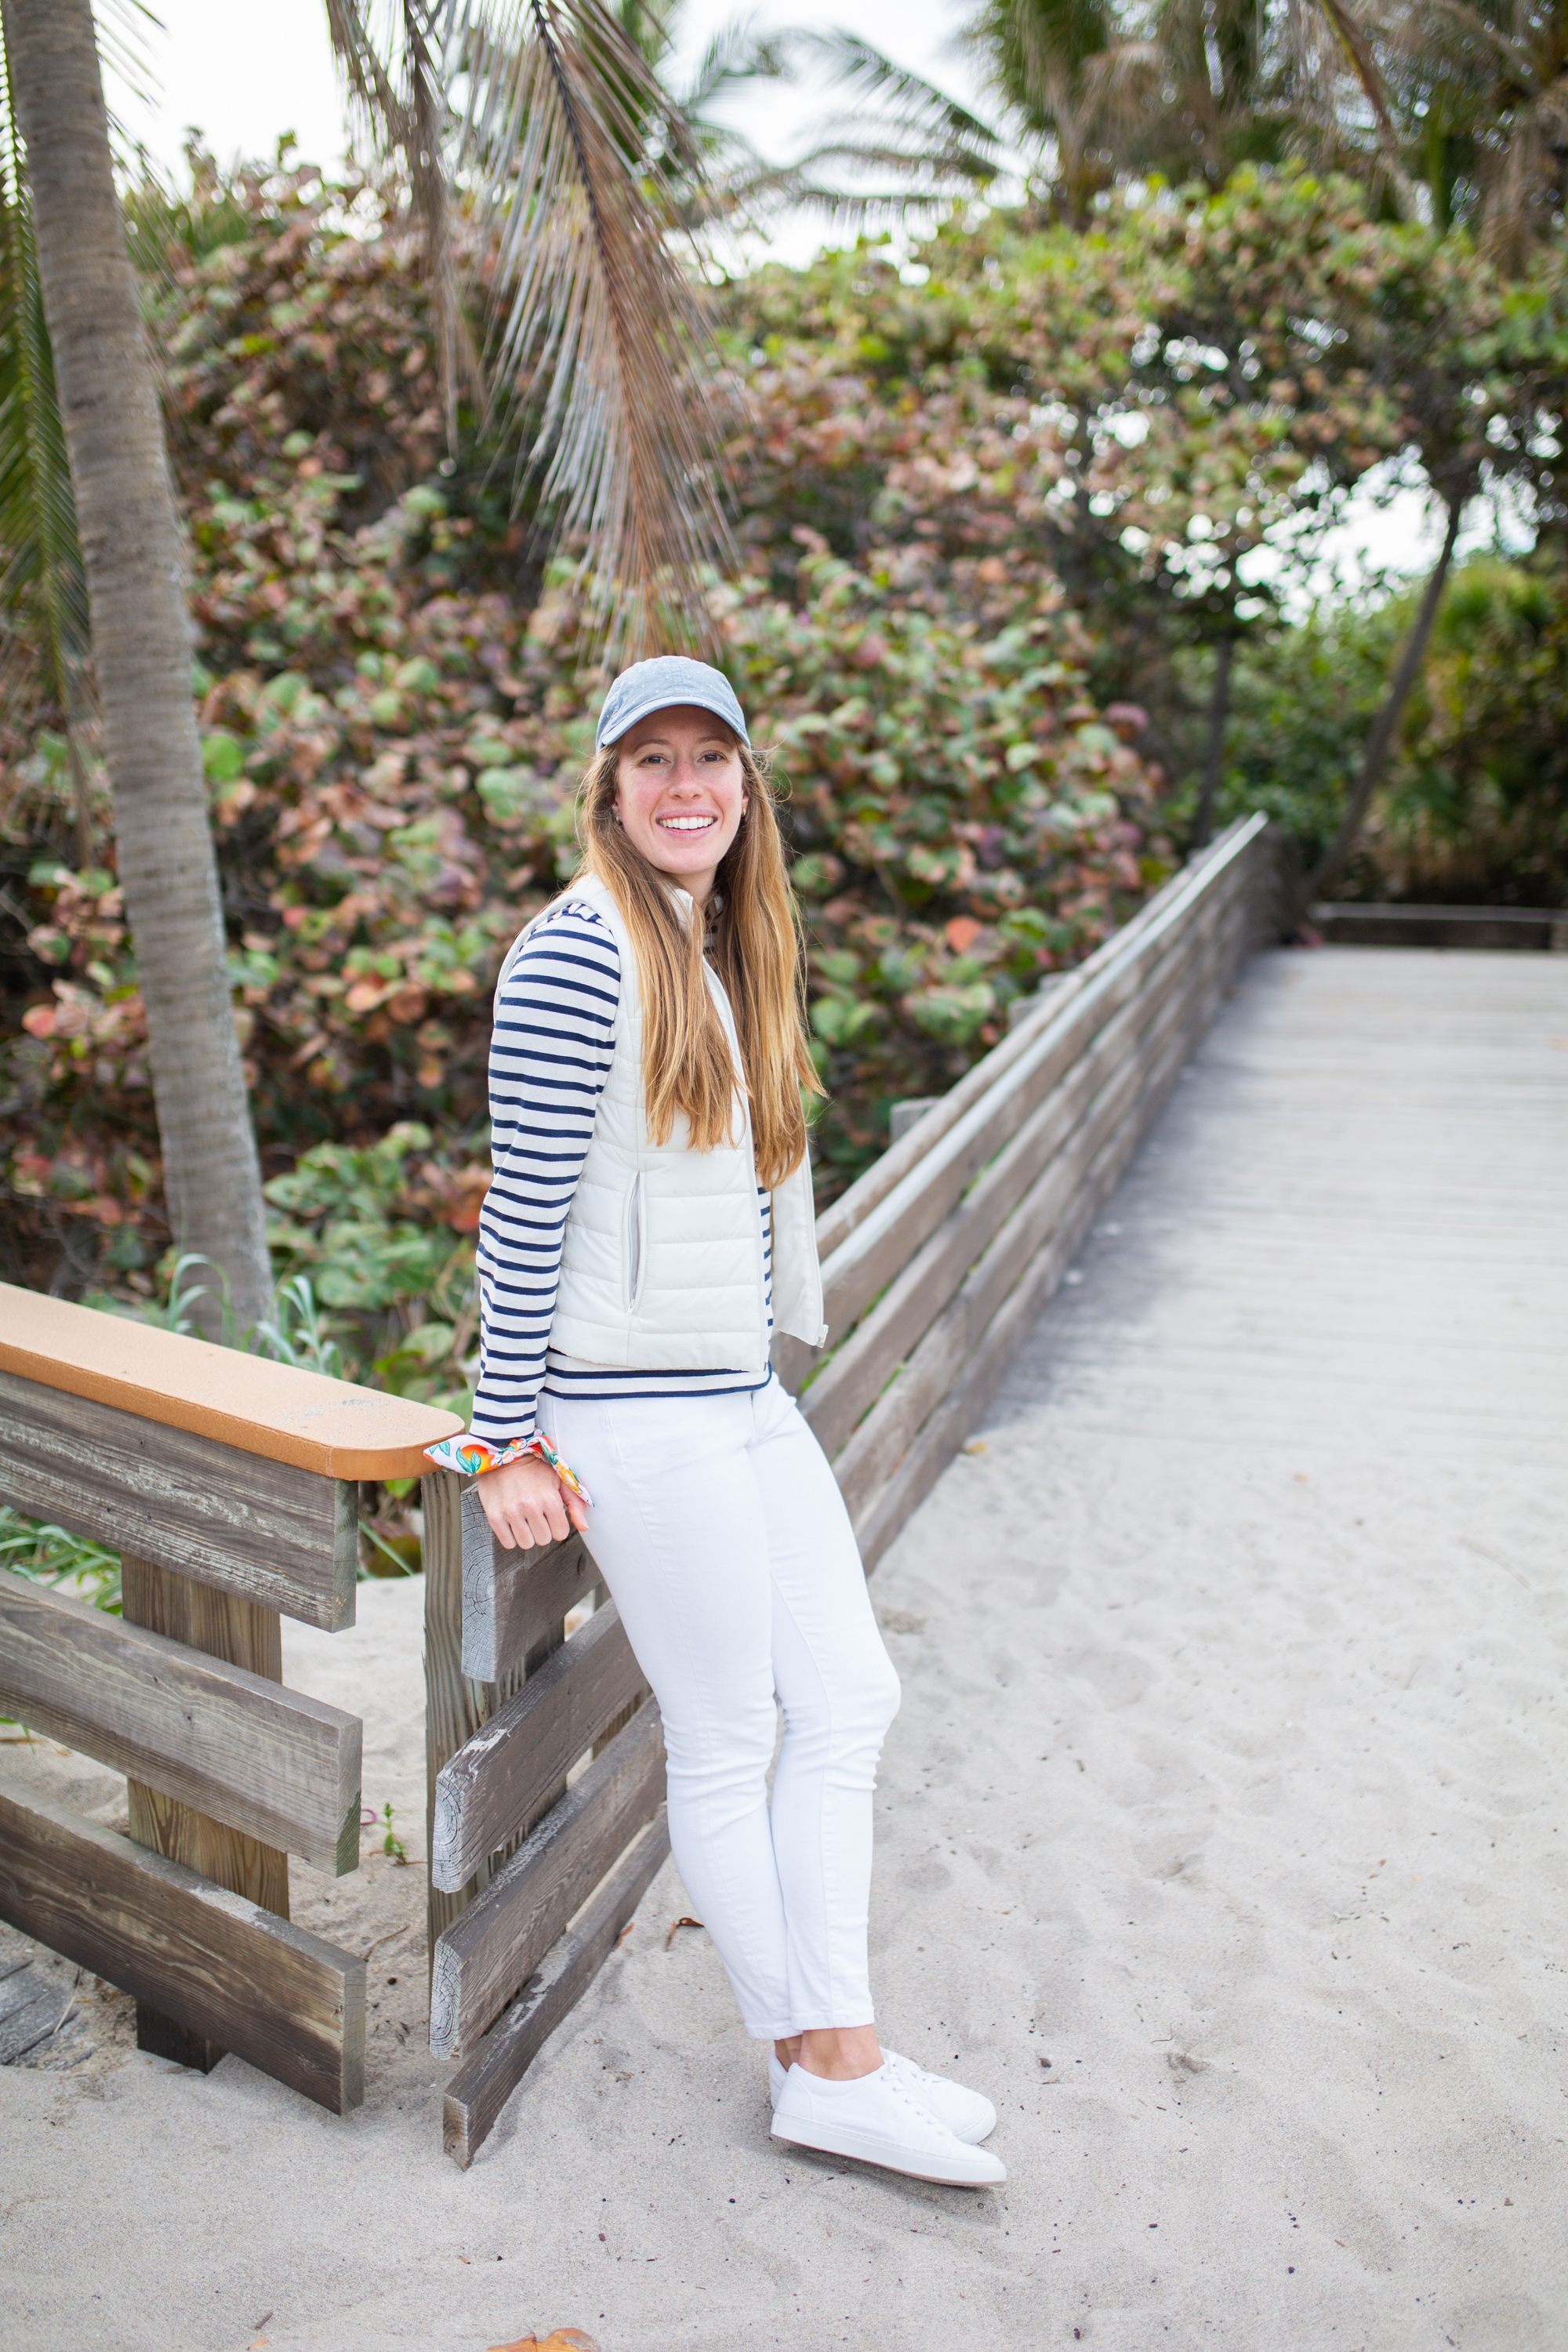 Saint James Breton Striped Shirt / American Style / Classic Style / How to Wear a Striped Top / Casual Outfit / White Jeans / Beach Style / Beach Outfit - Sunshine Style, A Florida Based Fashion Blog by Katie 